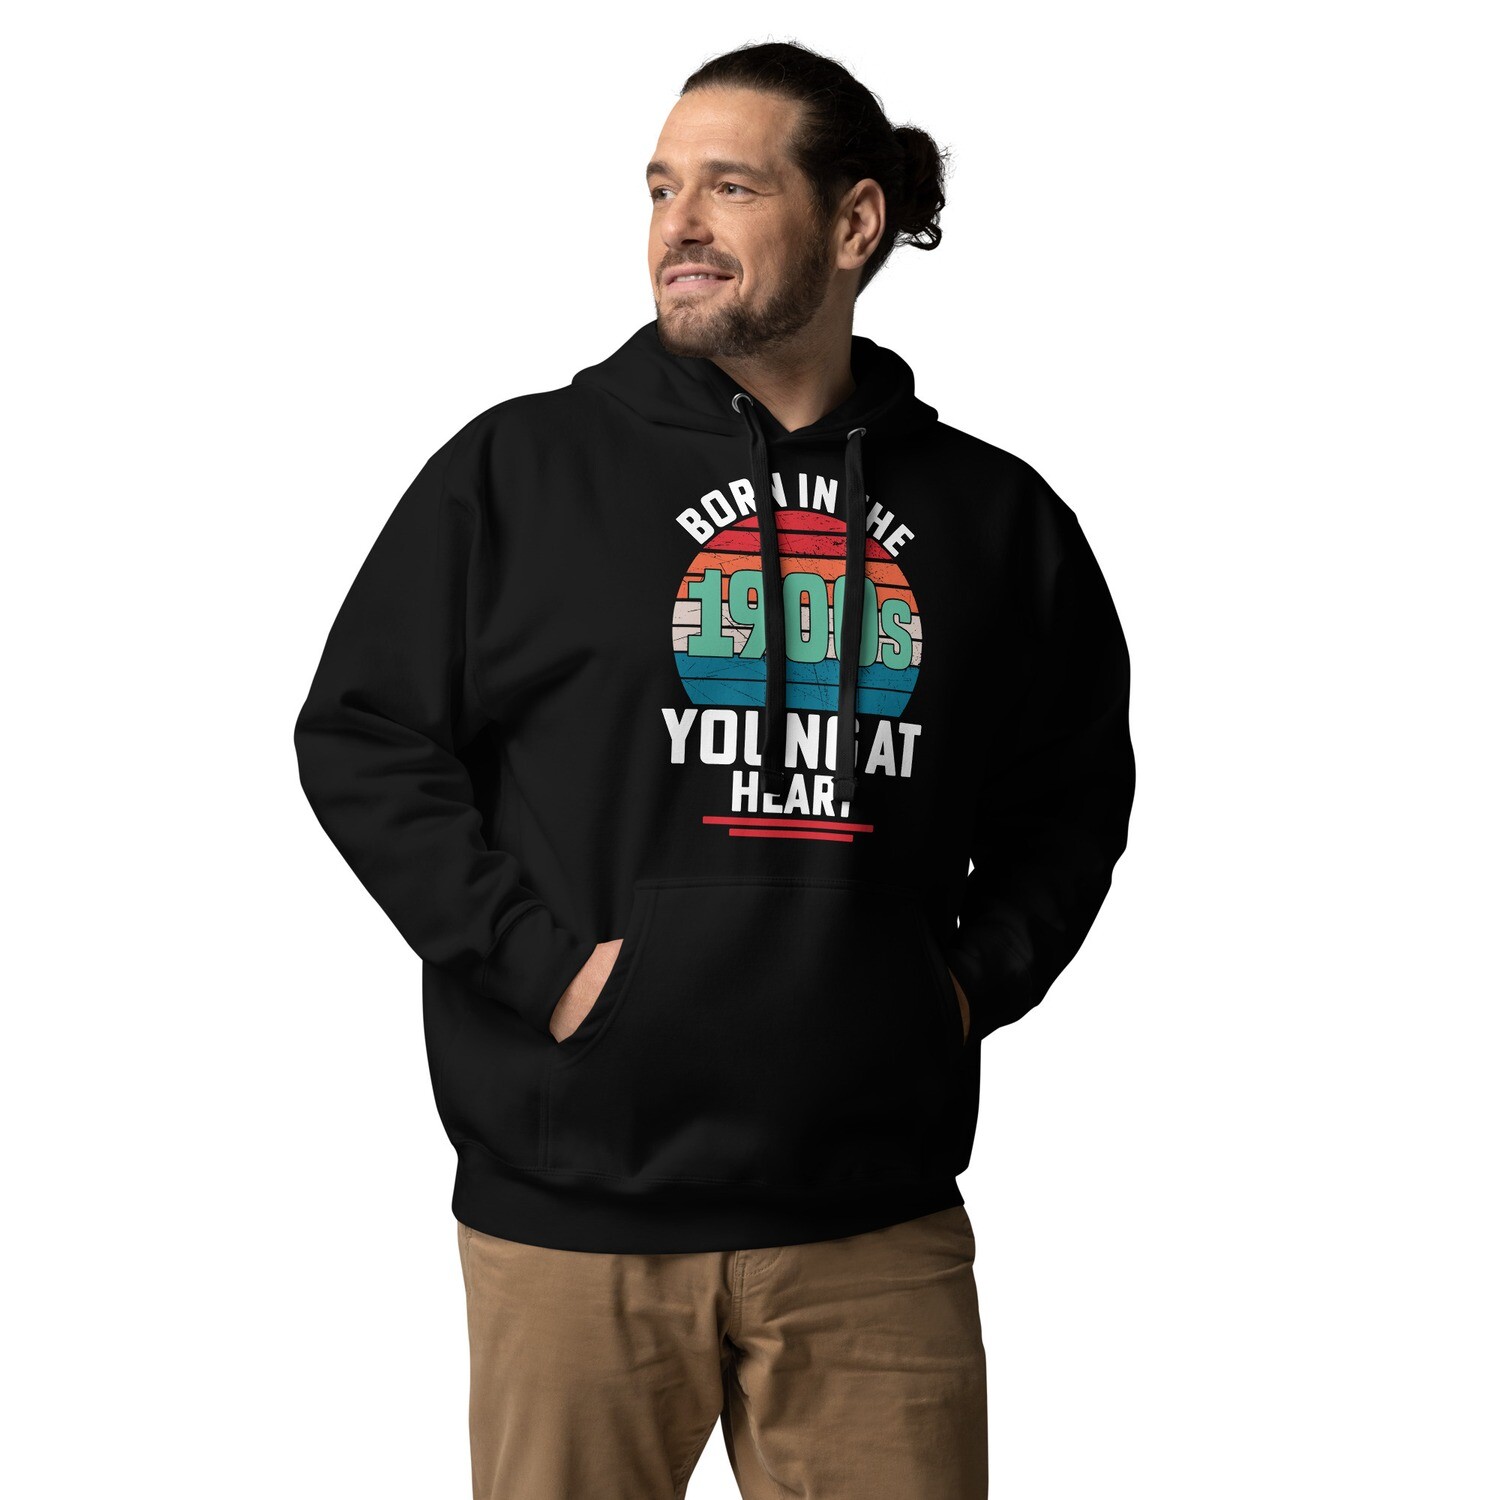 Born in the 1900s, Young At Heart Hoodie